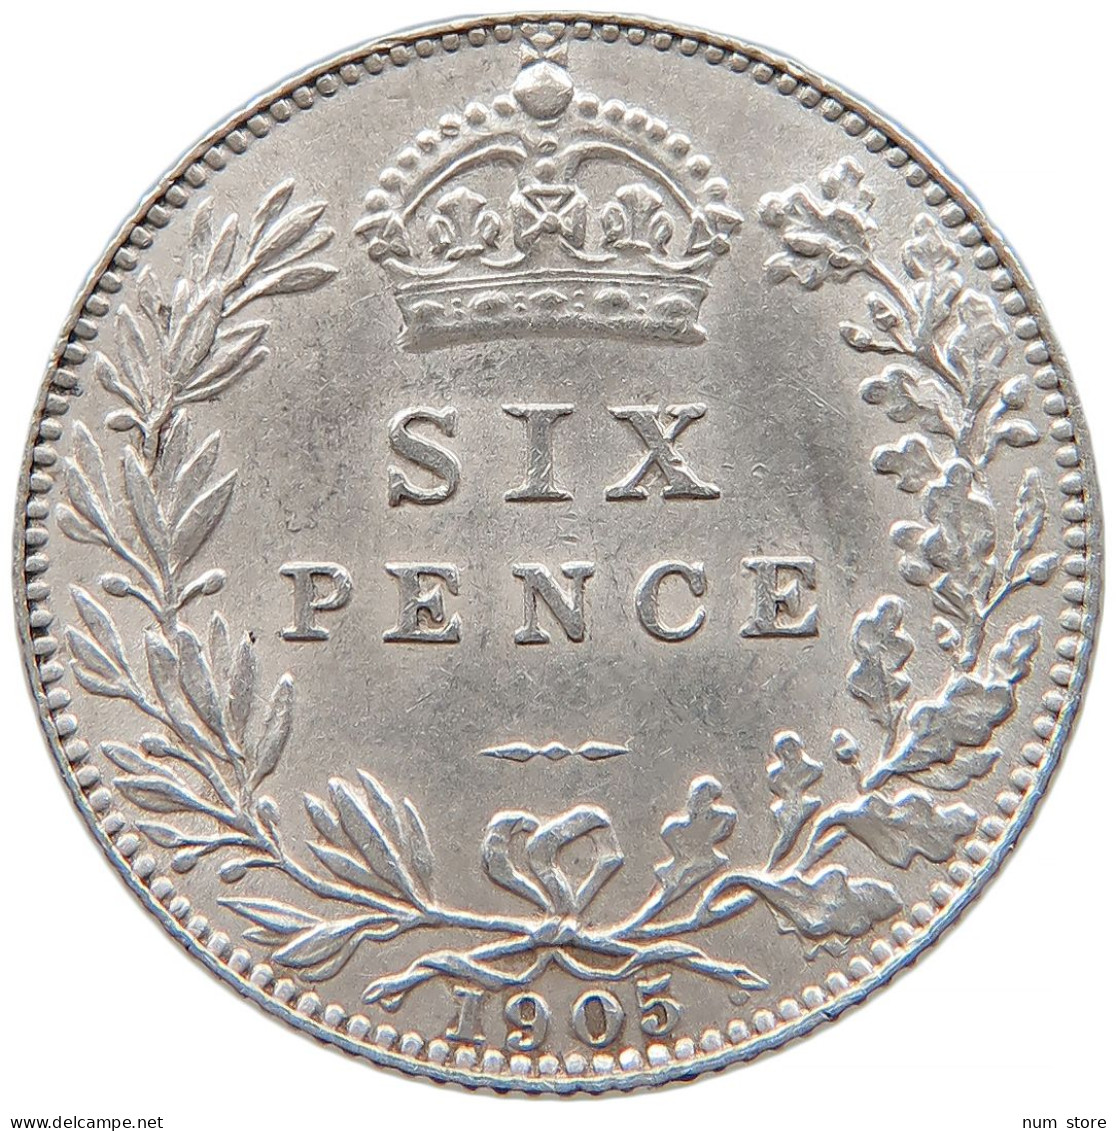 GREAT BRITAIN SIXPENCE 1905 Edward VII. (1901 - 1910) #t022 0601 - H. 6 Pence